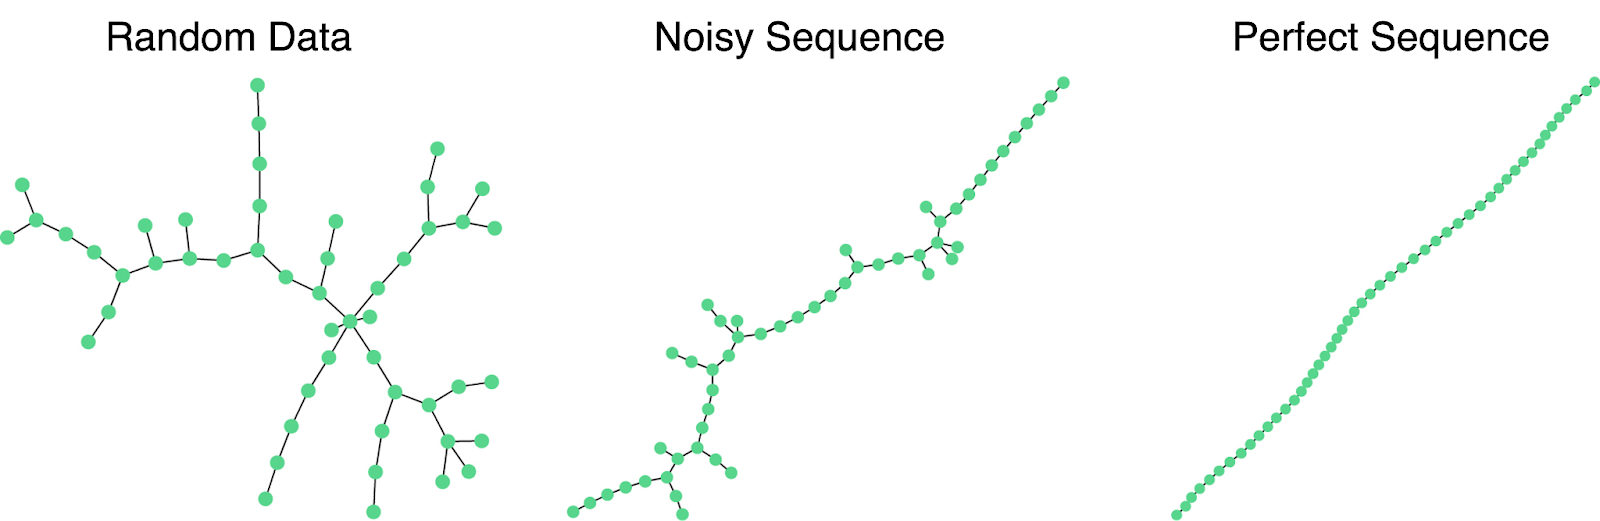 Three examples - labelled 'random data', 'noisy sequence', and 'perfect sequence' - demonstrating that data with stronger trends ('noisy' and 'perfect sequence') have more narrow and elongated minimum spanning trees (adapted from Baron and Ménard, Figure 1).